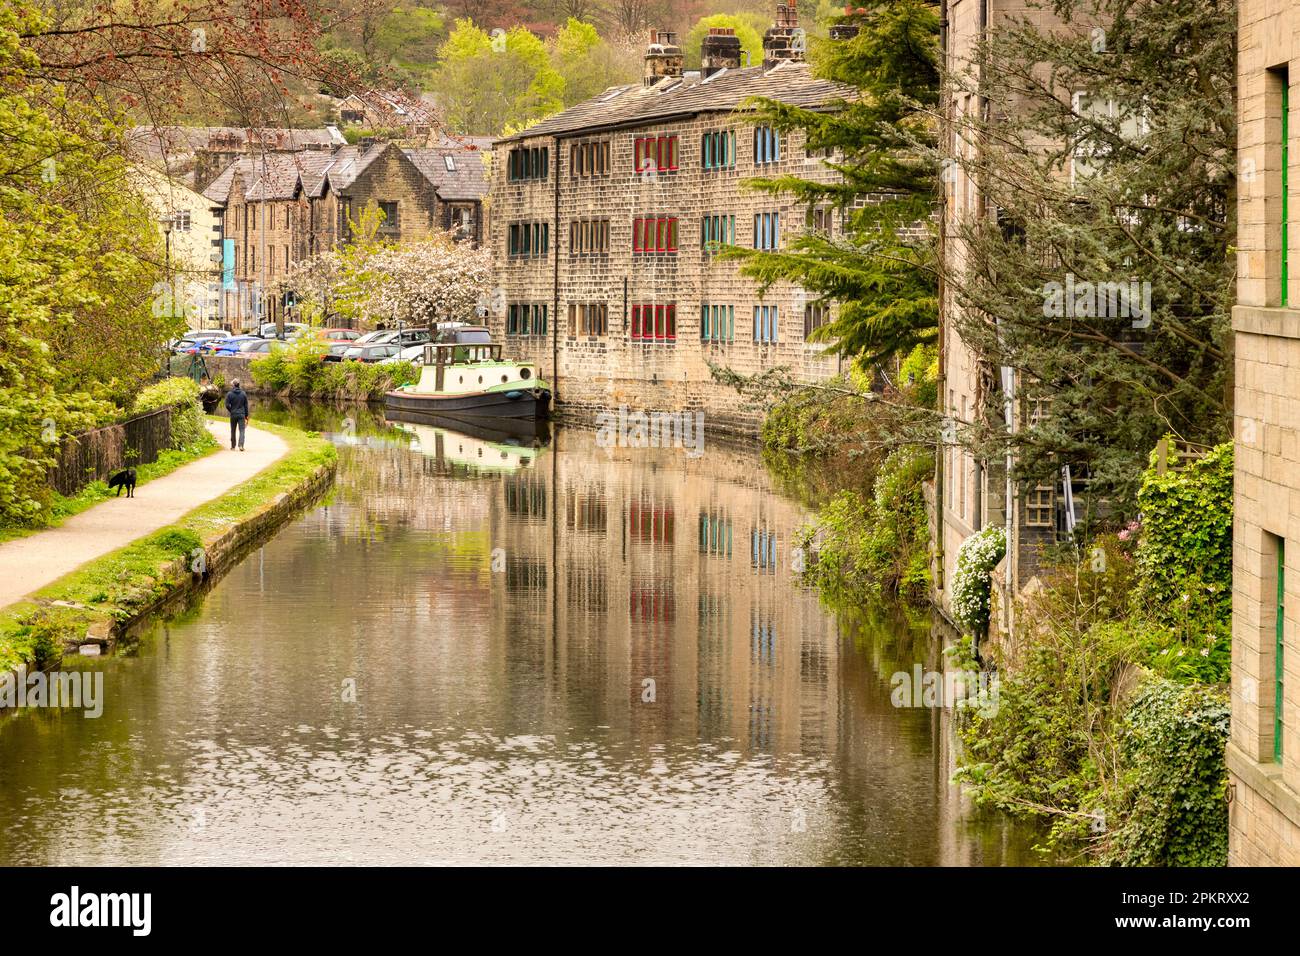 27 April 2022-Hebden Bridge, West Yorkshire, UK - A view along the canal at Hebden Bridge during spring. one person walking a dog on the tow path. Stock Photo